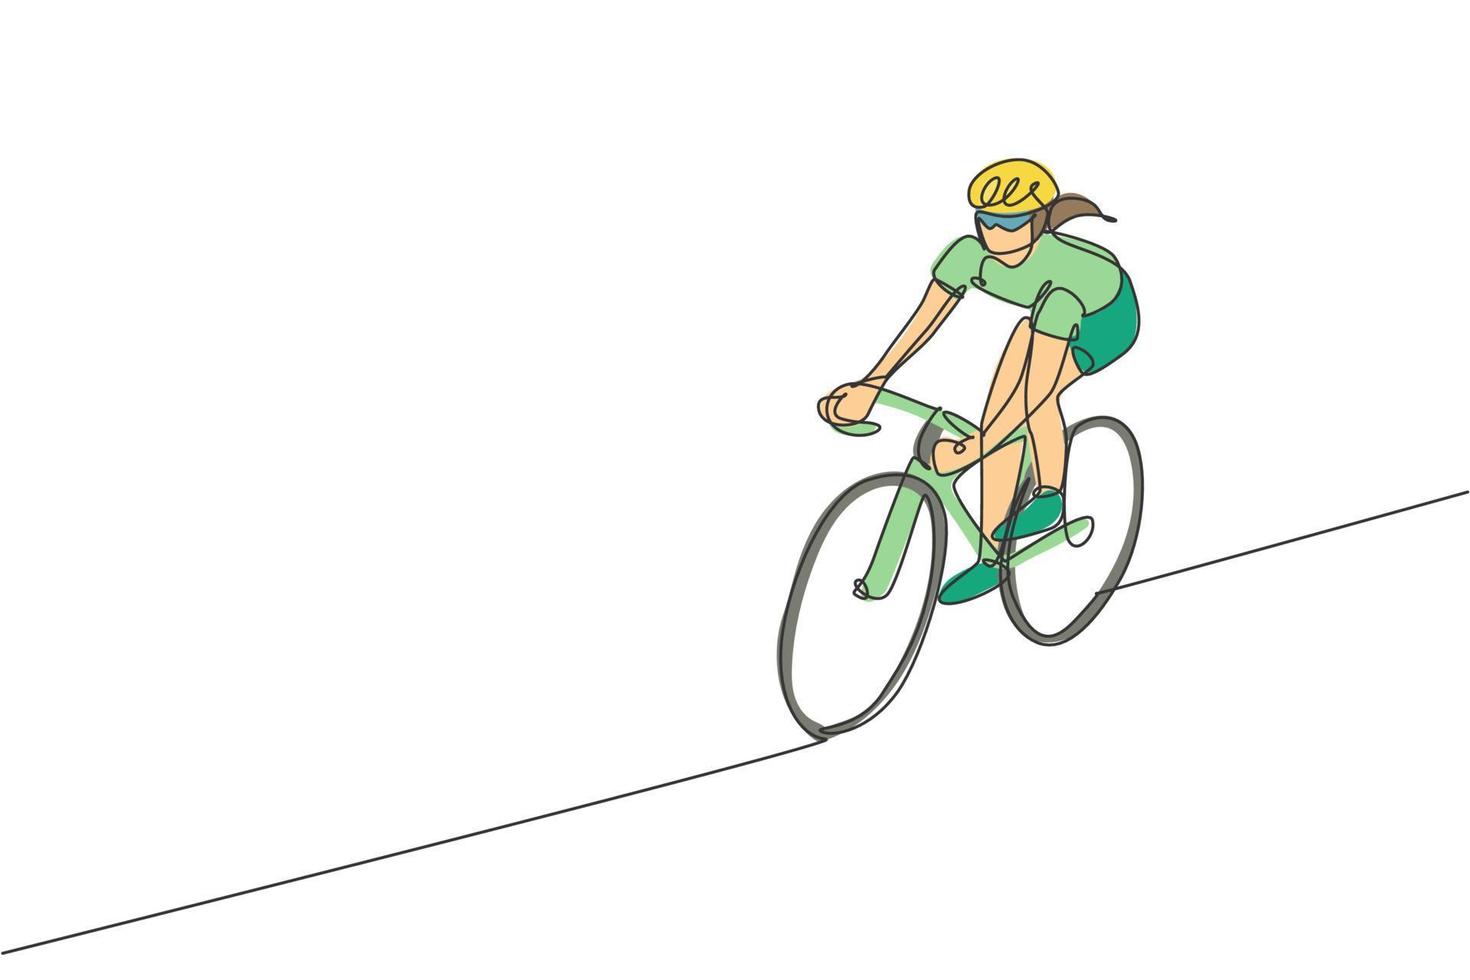 One continuous line drawing of young sporty woman bicycle racer focus train her skill at cycling track. Road cyclist concept. Single line draw design vector illustration for cycling competition poster